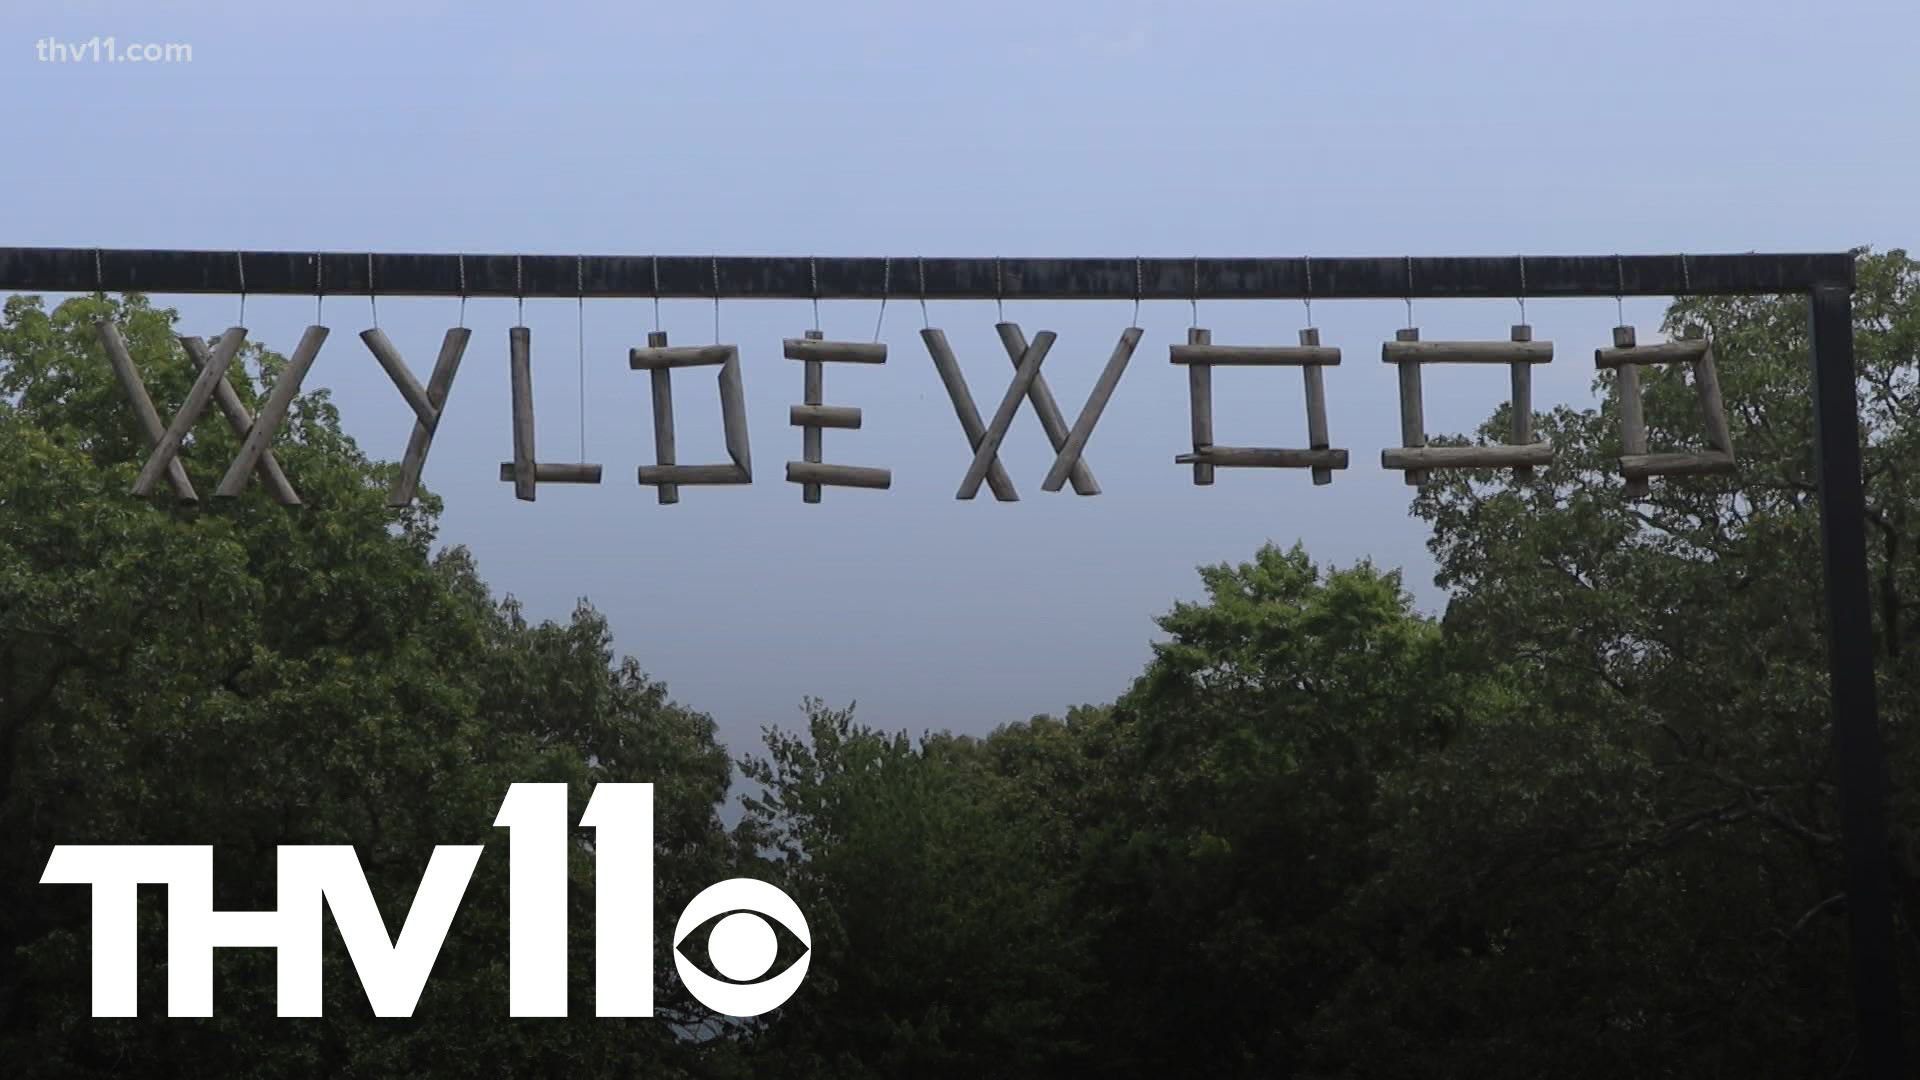 Camp Wyldewood had to send campers home on Saturday after a mixture of campers and staff members tested positive for COVID-19.